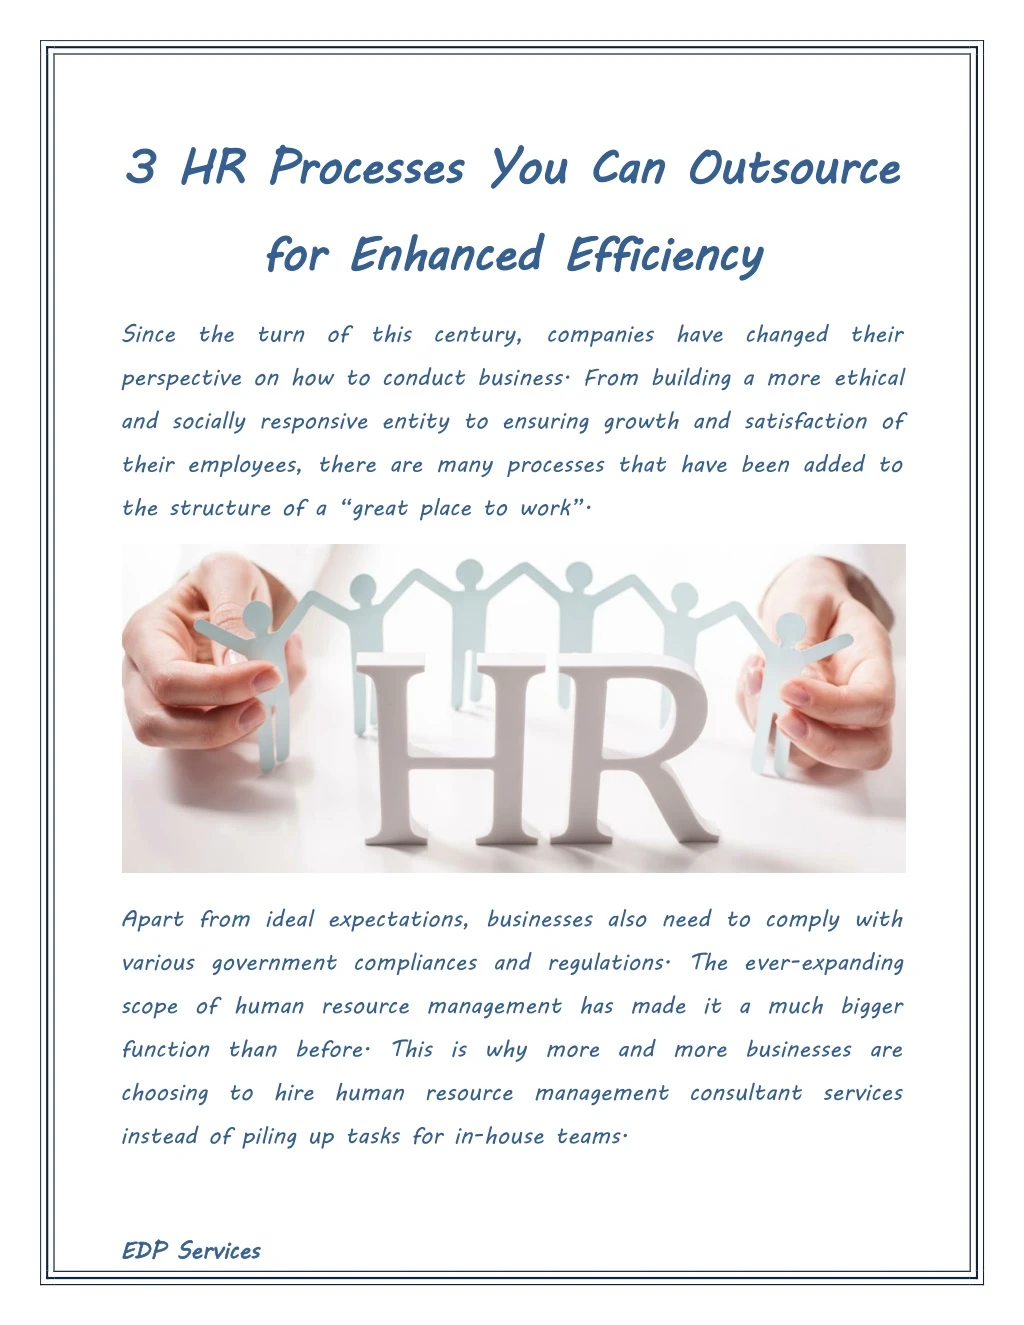 3 hr processes you can outsource for enhanced